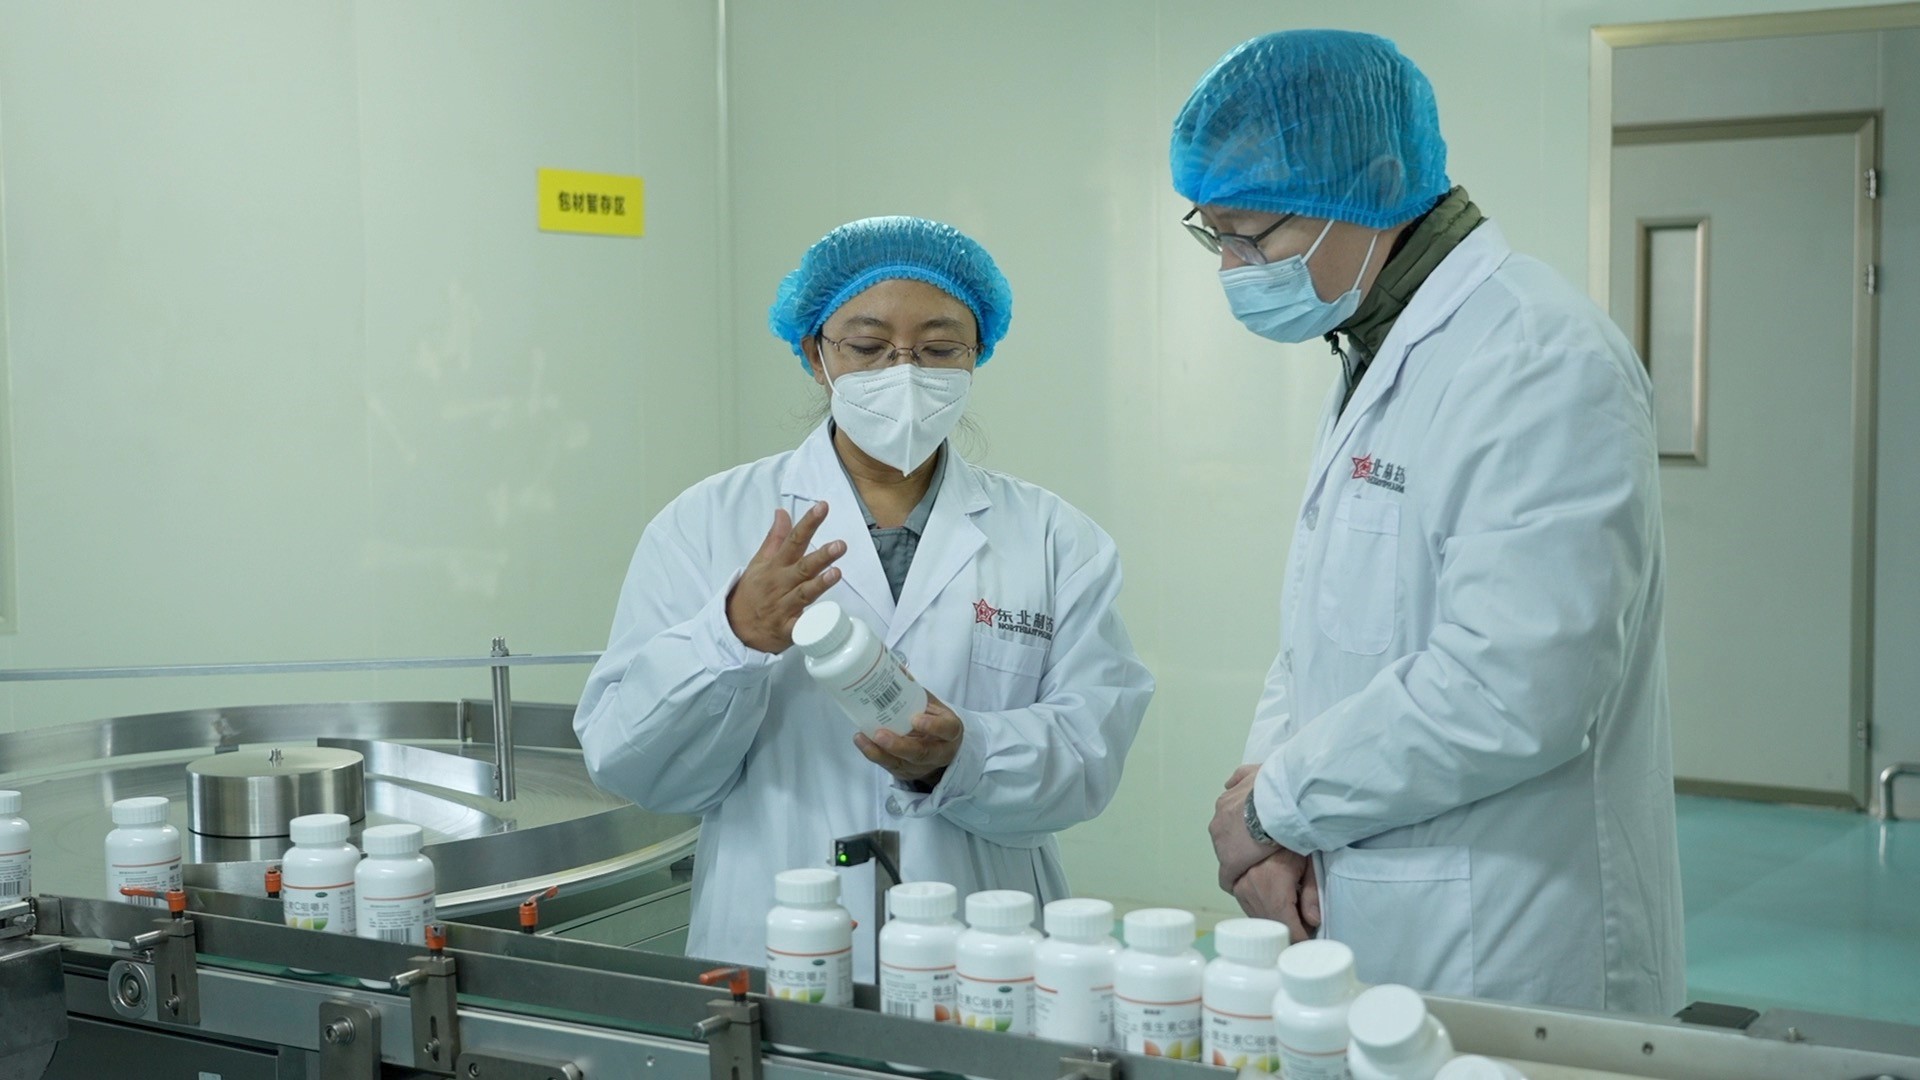 Wang Weilin (L), head of production from Northeast Pharmaceutical Group, told CGTN: 